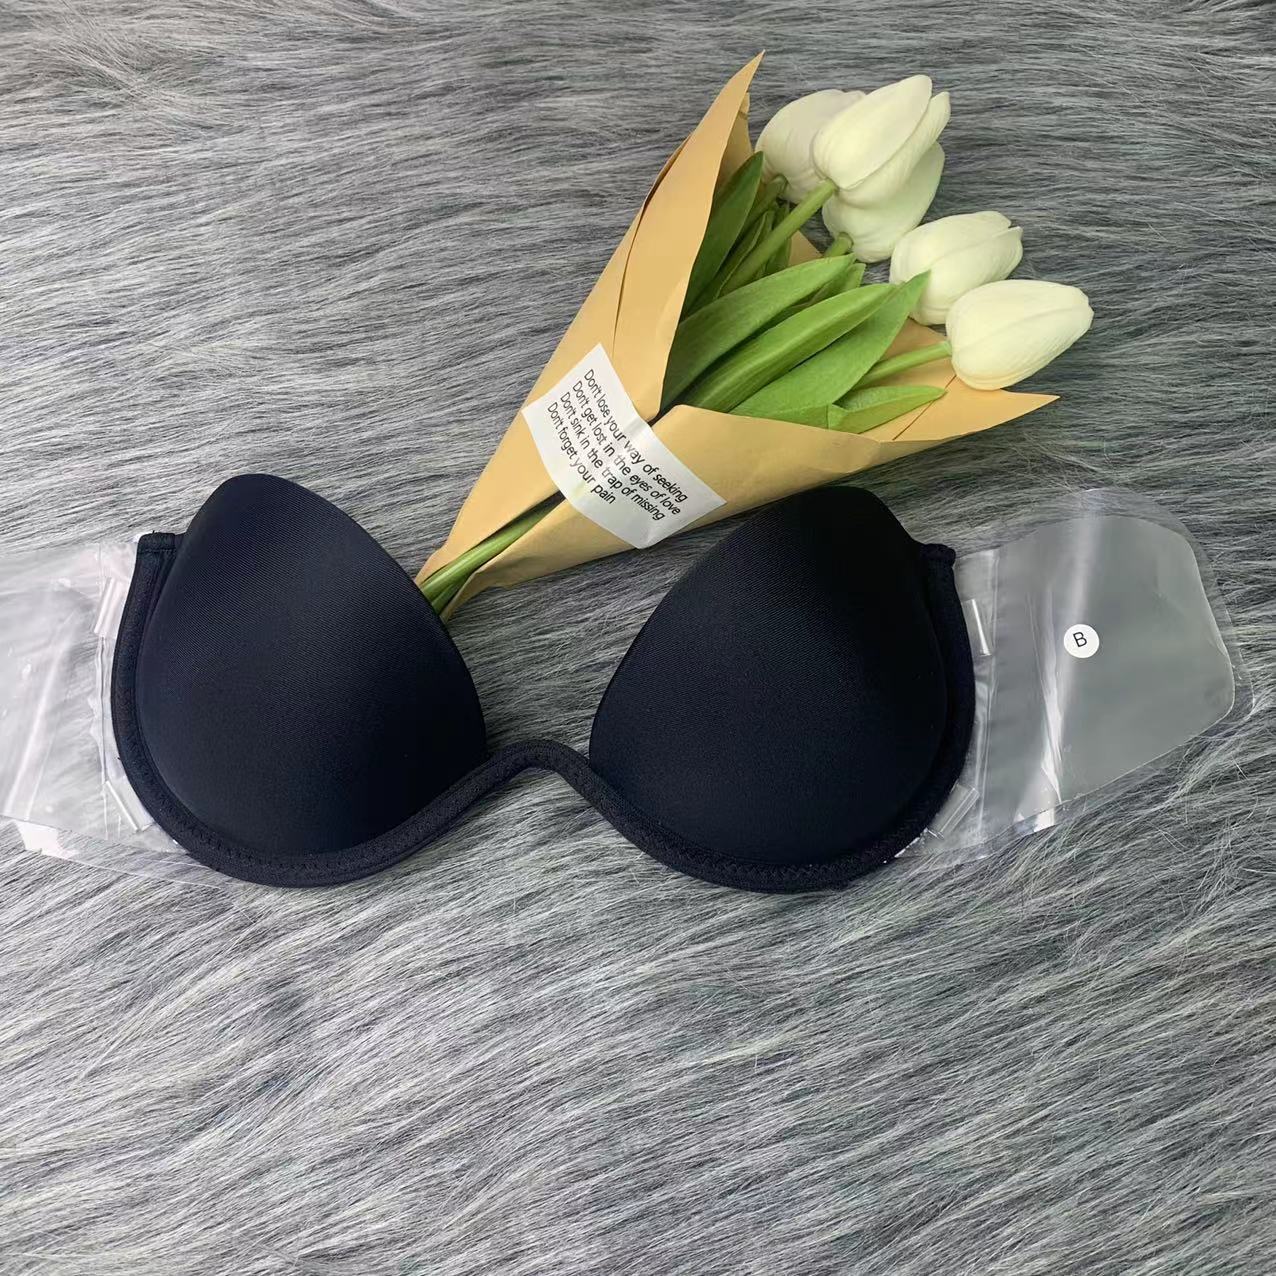 Underwear Seamless Invisible Bra Removable Push Up Thin With Steel Rin –  Sbcollections24